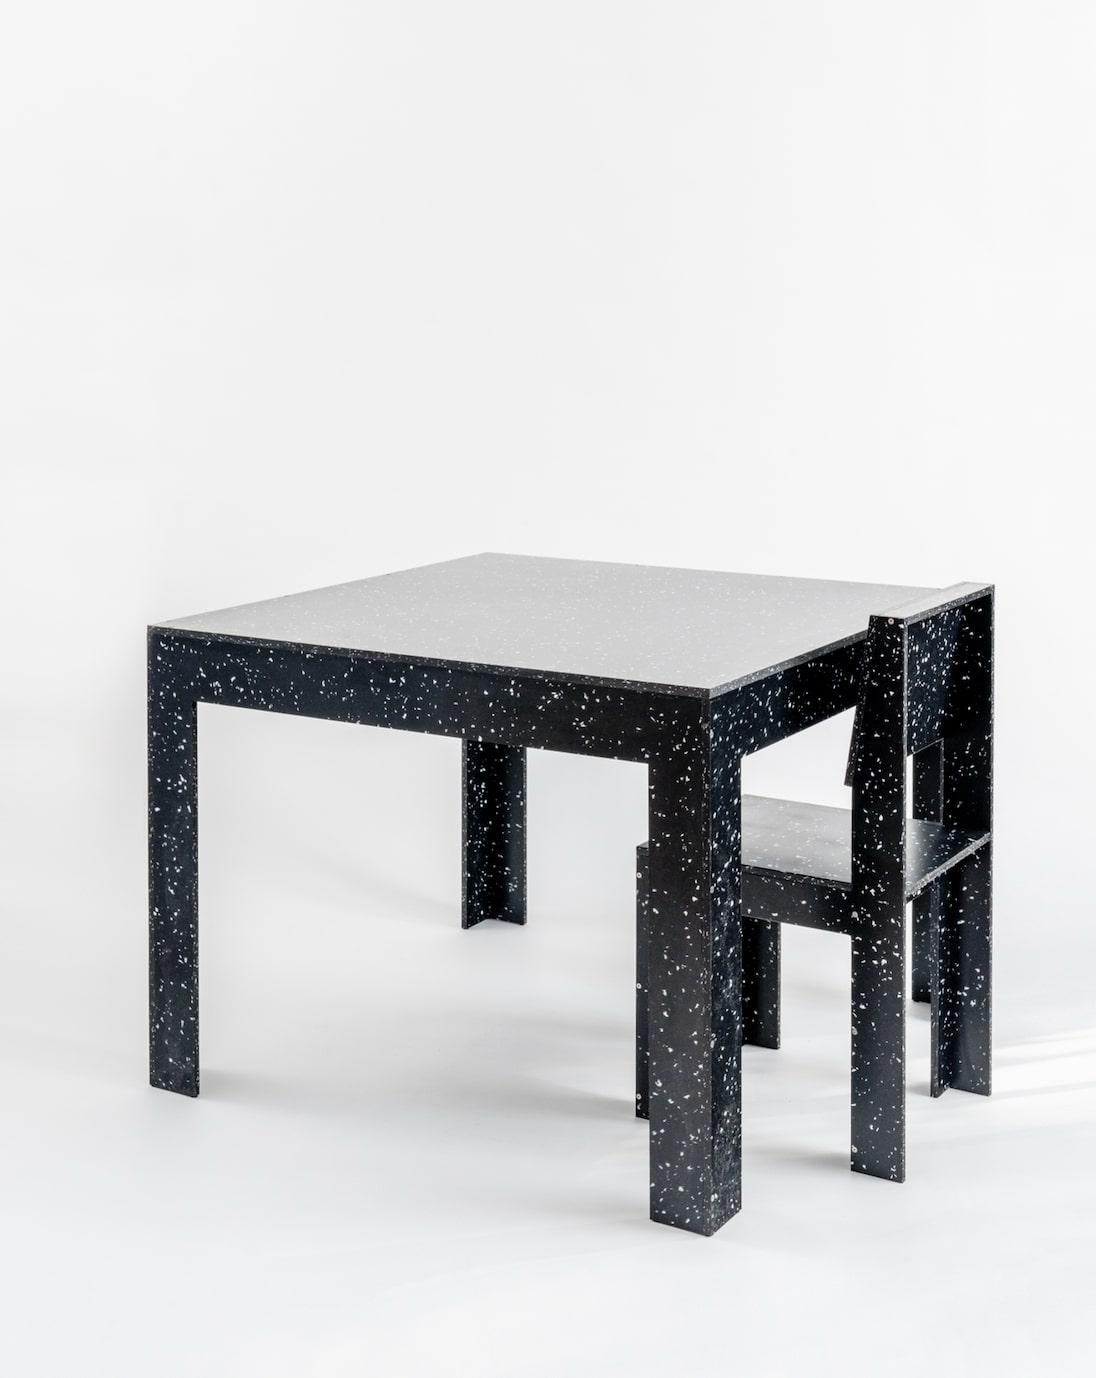 British Square Table in Black and White Terrazzo-like Recycled Post-Consumer Plastic For Sale